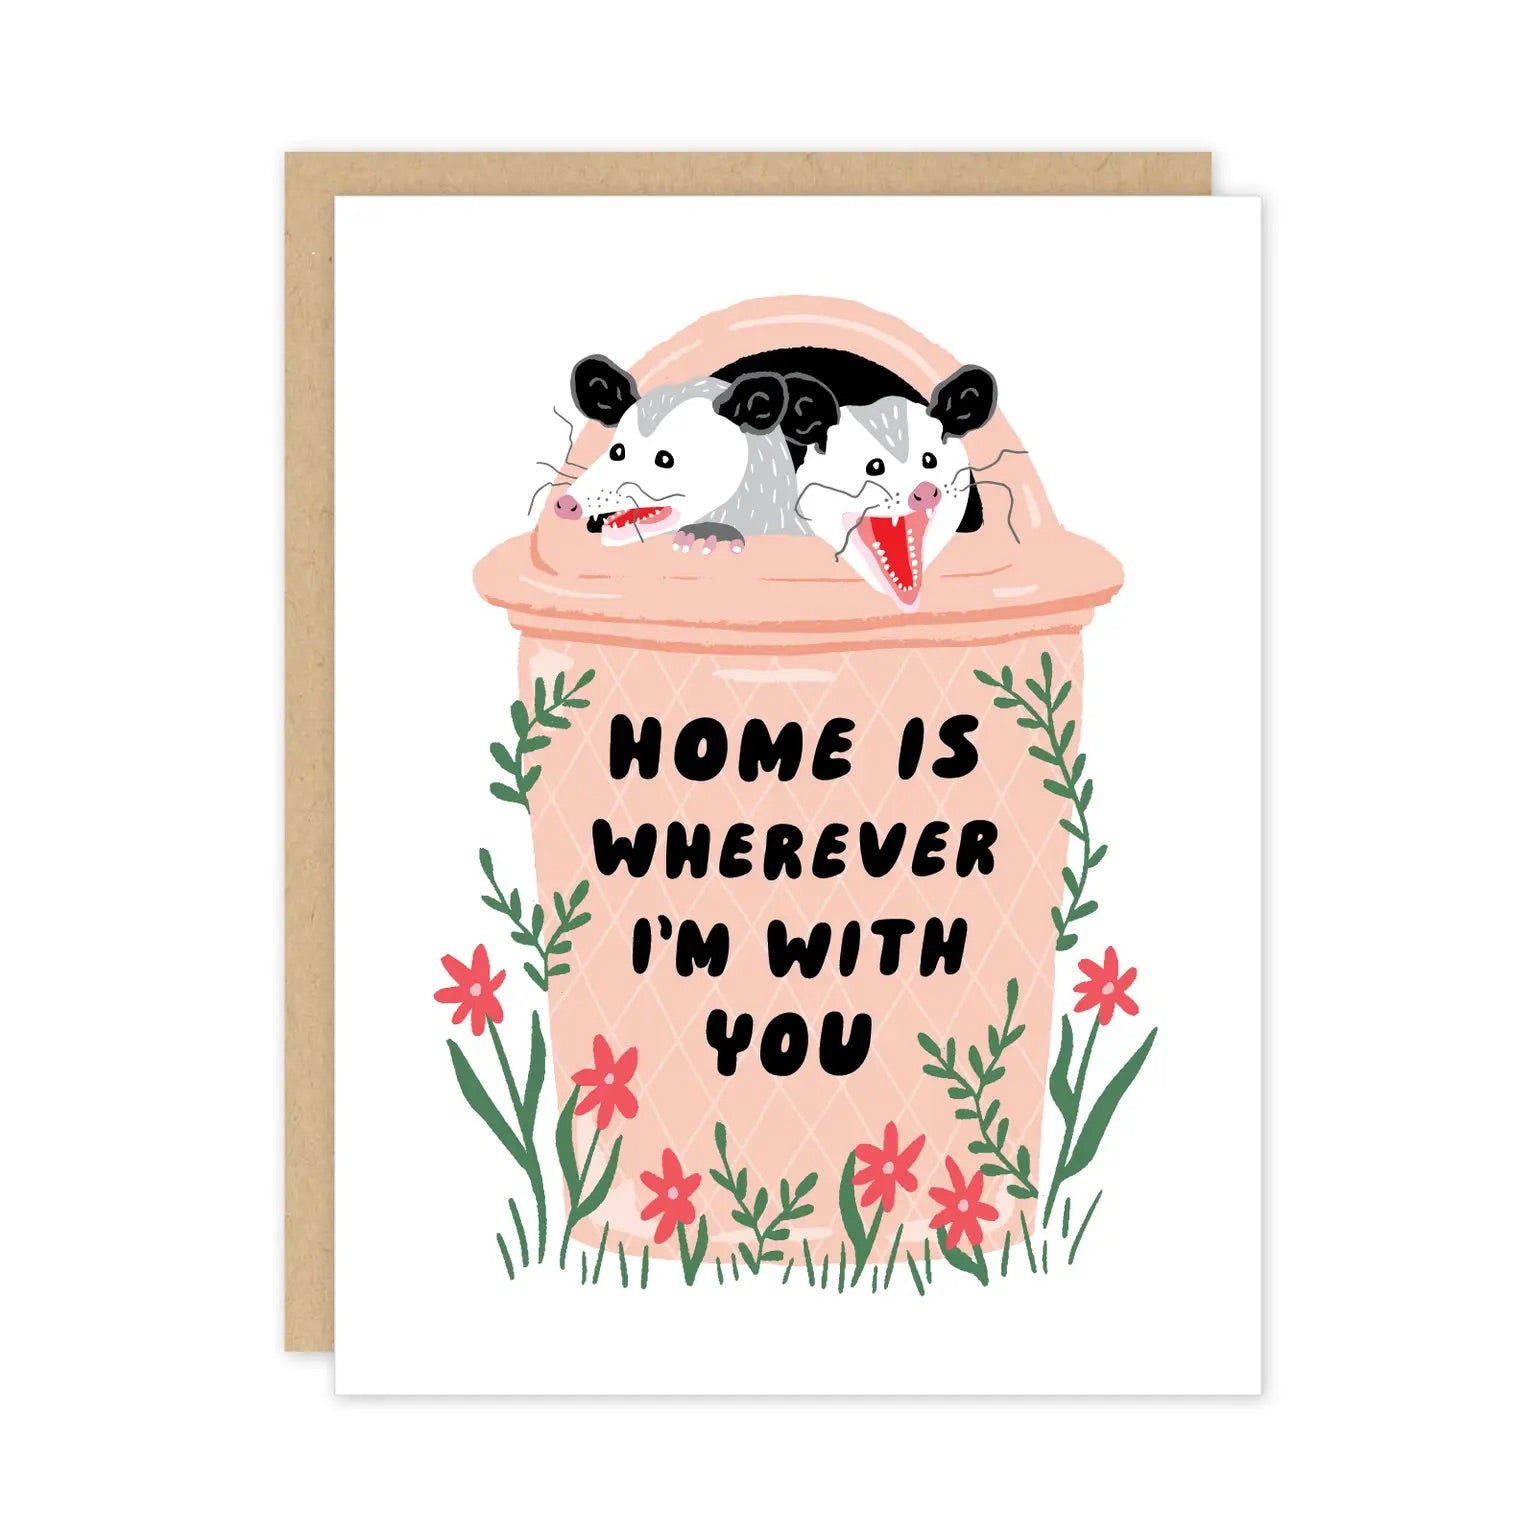 White card featuring an illustration of two possums sticking their heads out of a pink trashcan. Black text reads "home is wherever I'm with you"